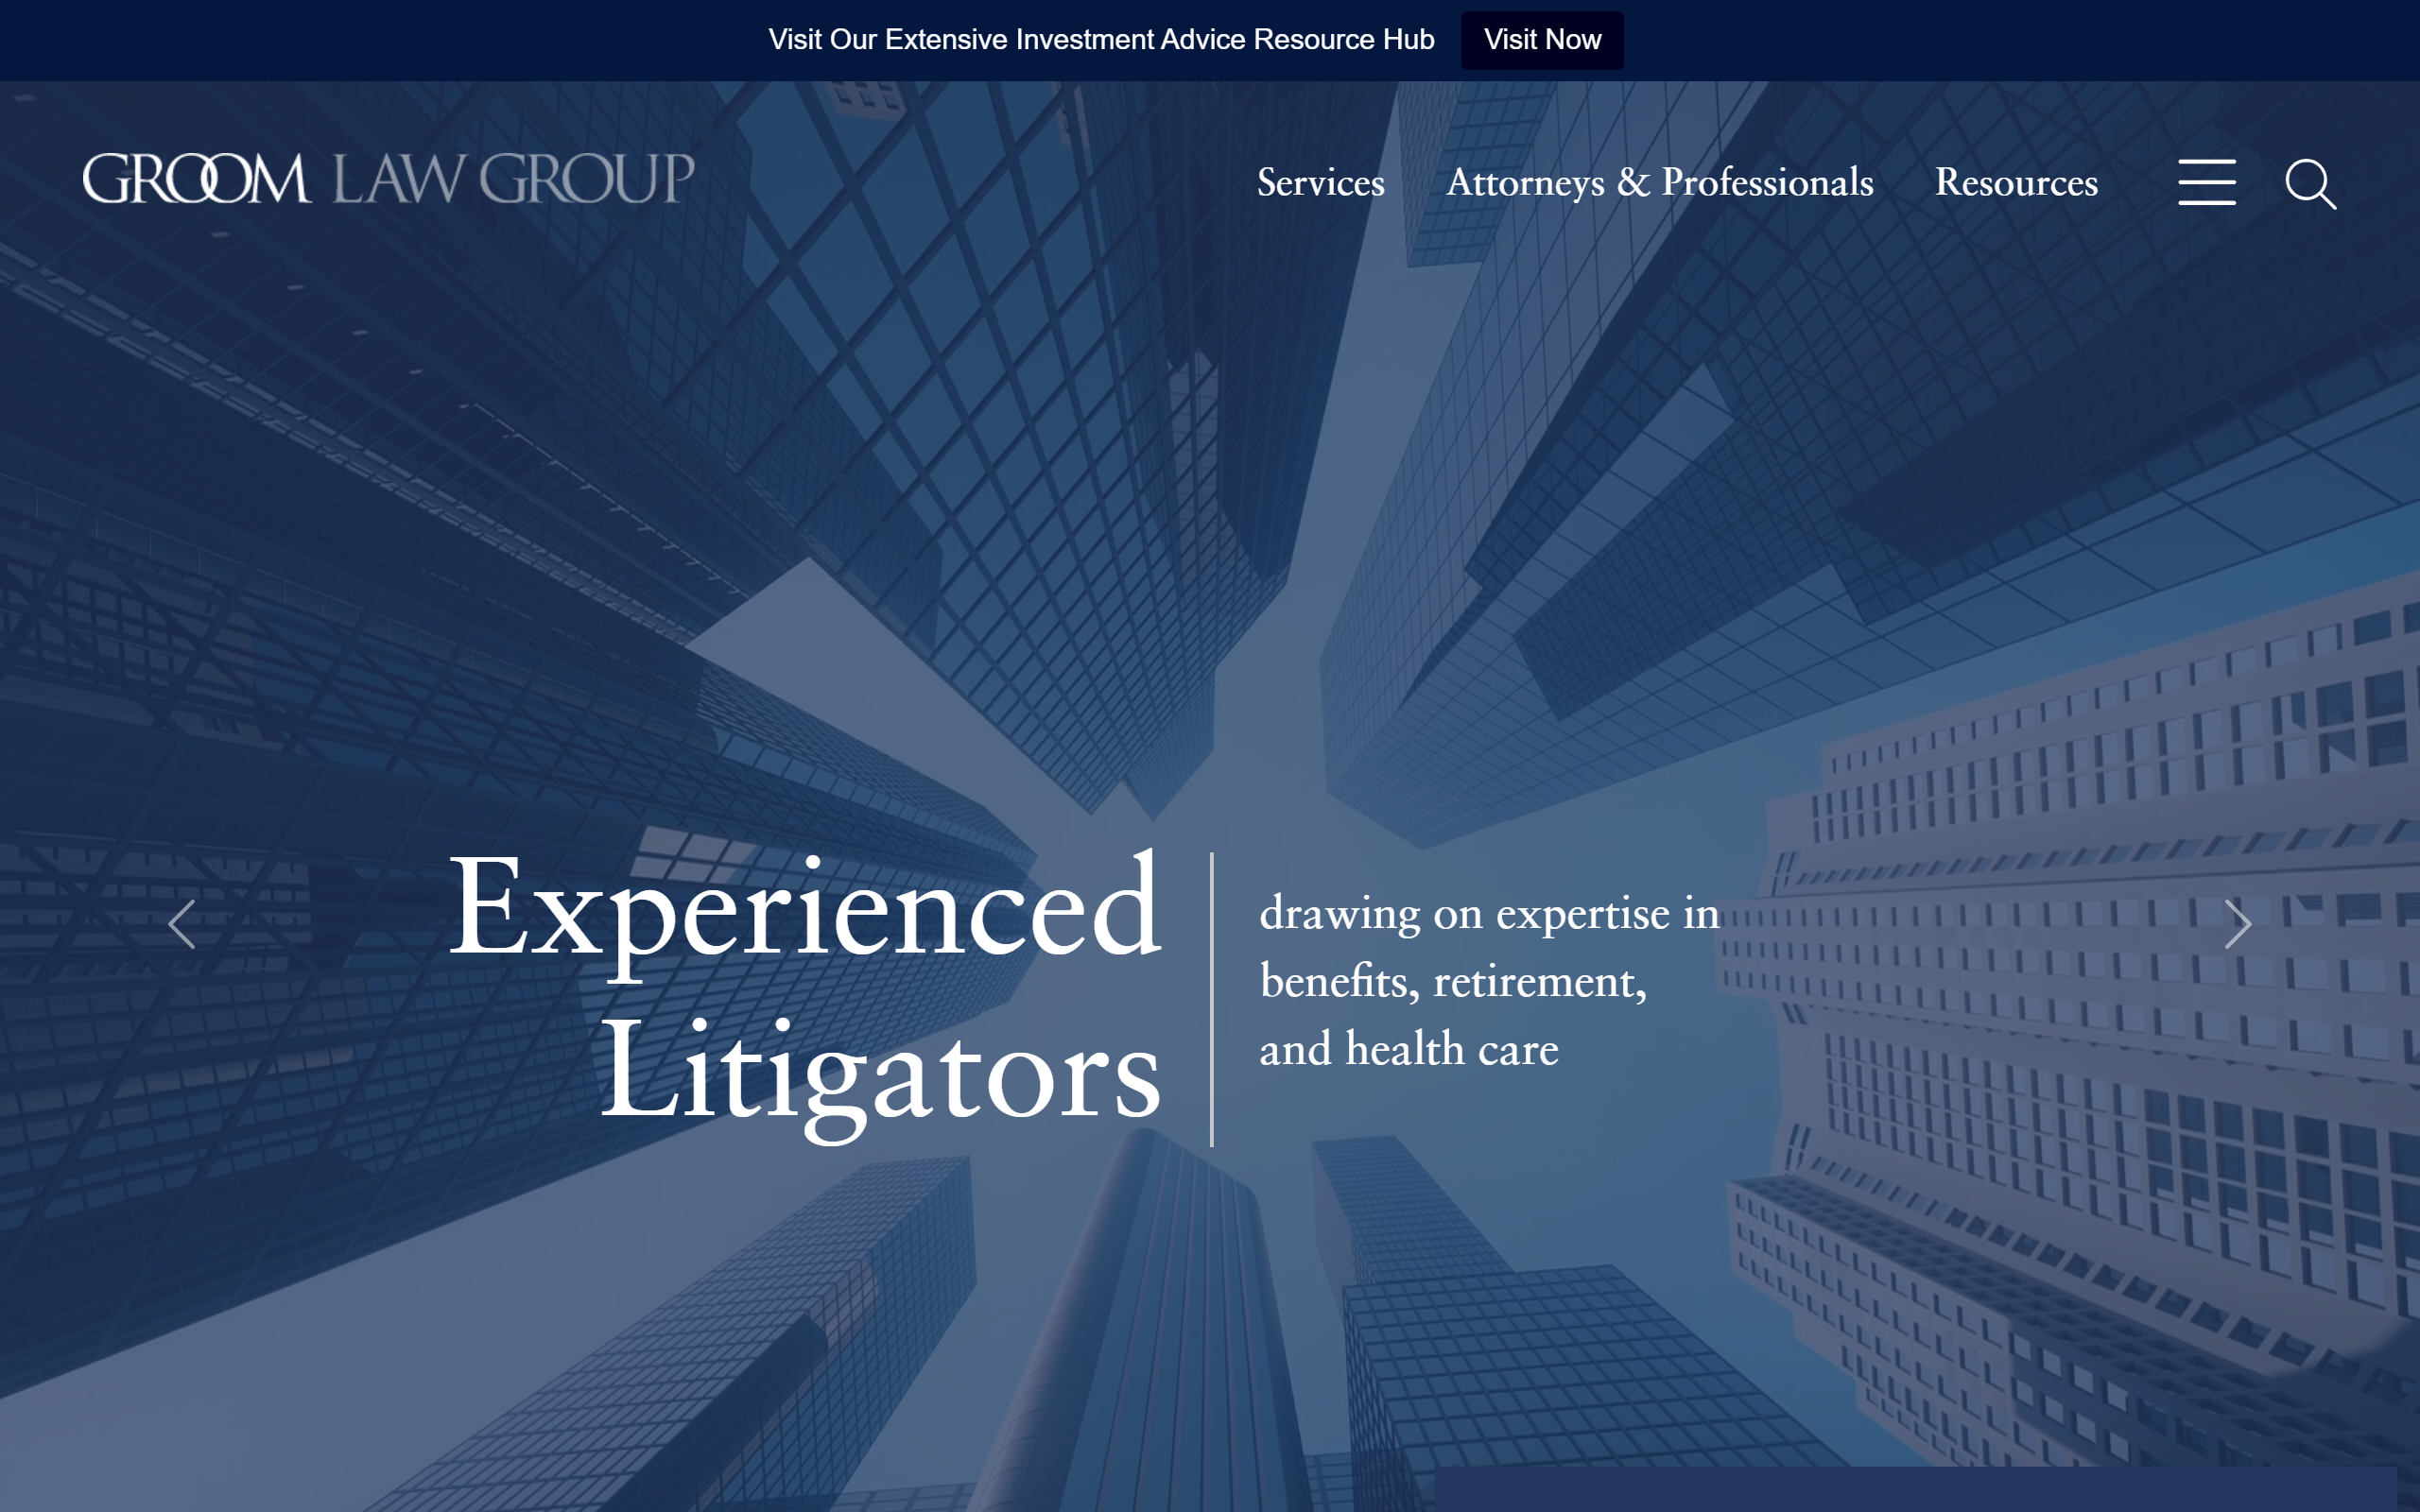 Groom Law Group law firm website